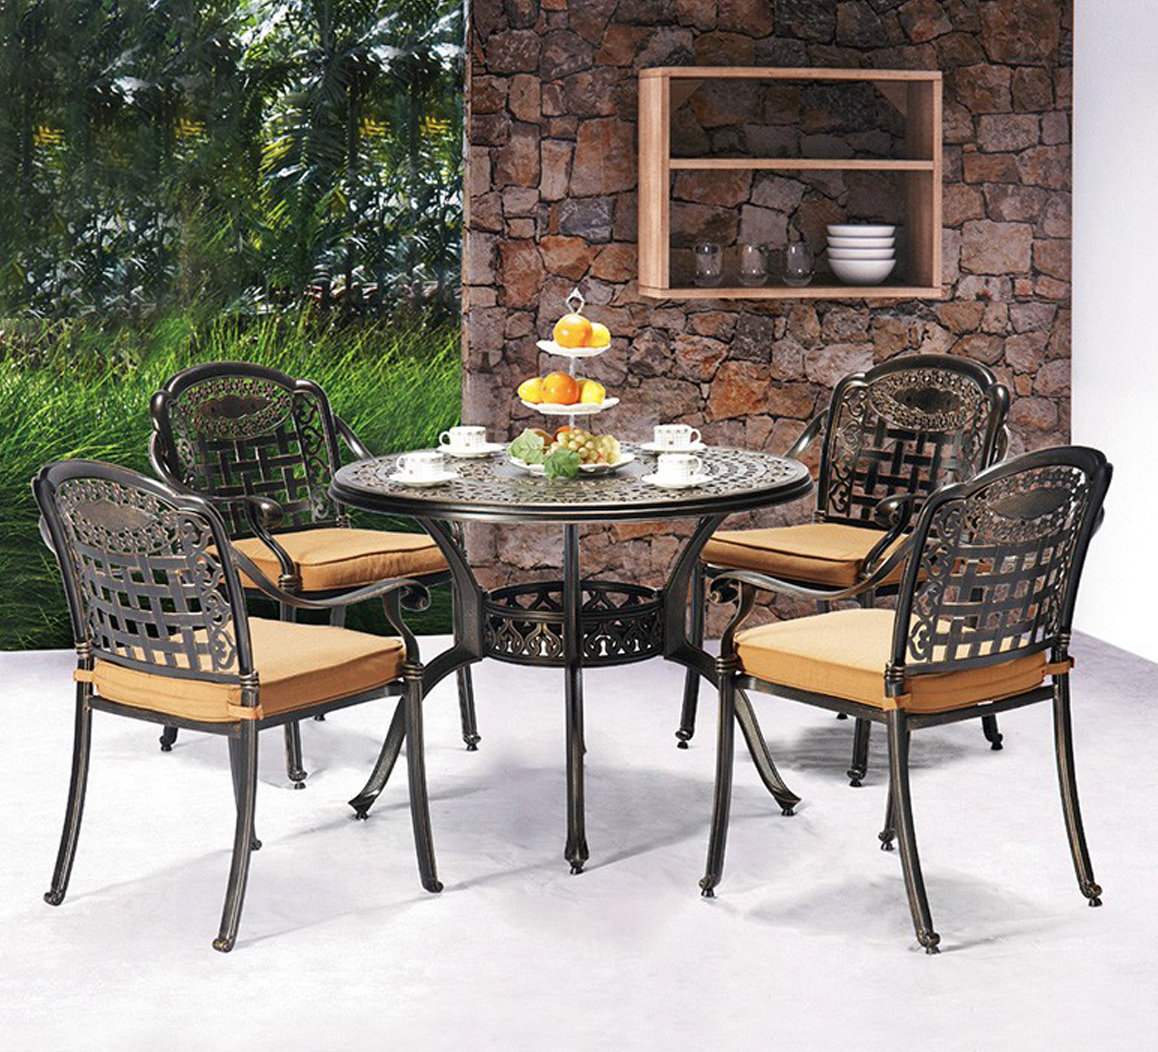 4 seats and 6 seats outdoor dining set cast aluminum with waterproof cushion